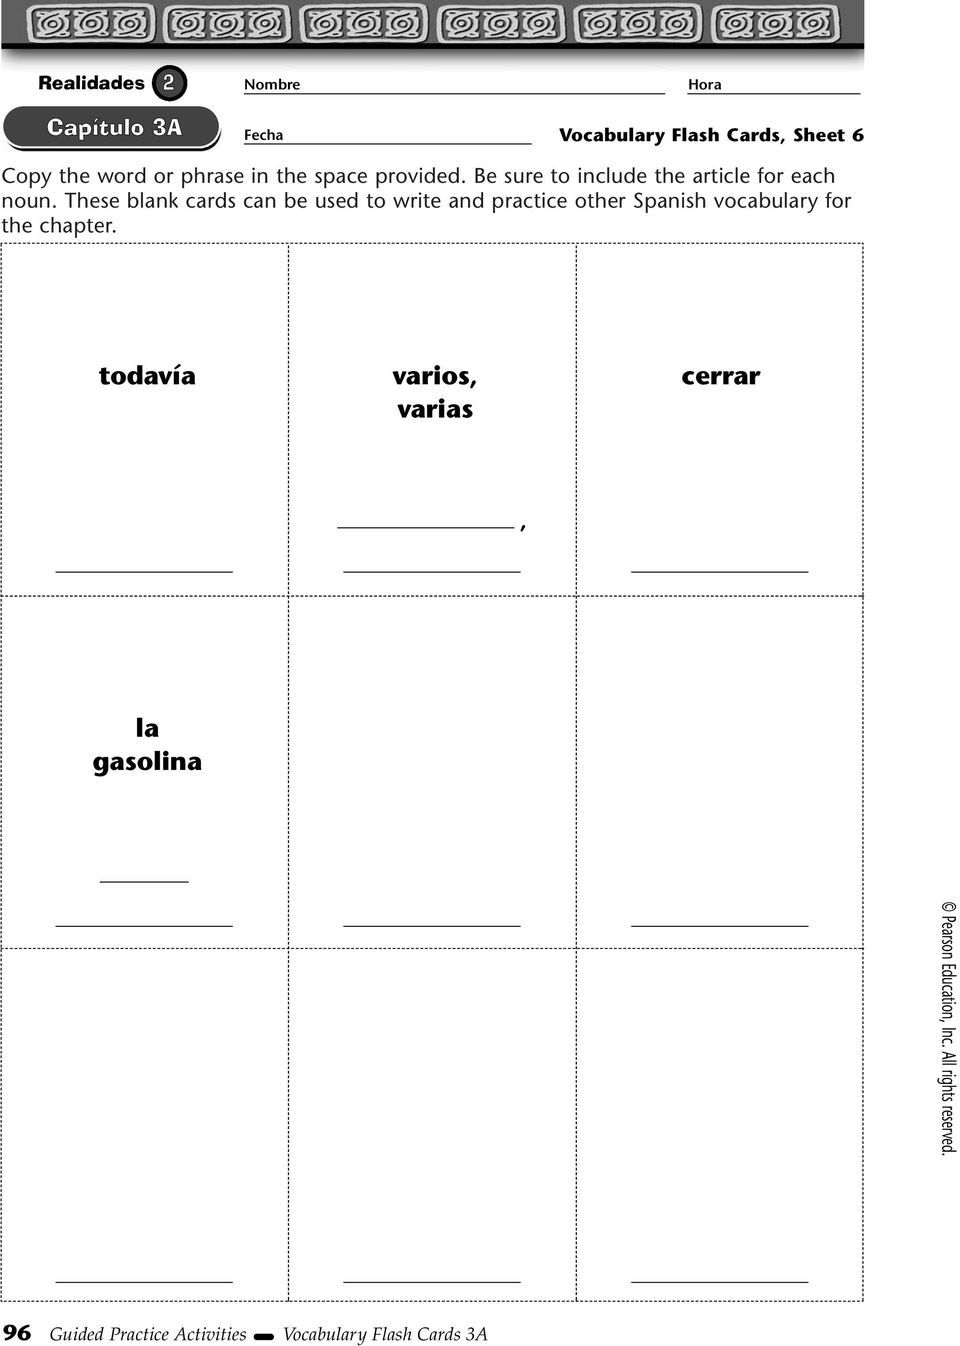 These blank cards can be used to write and practice other Spanish vocabulary